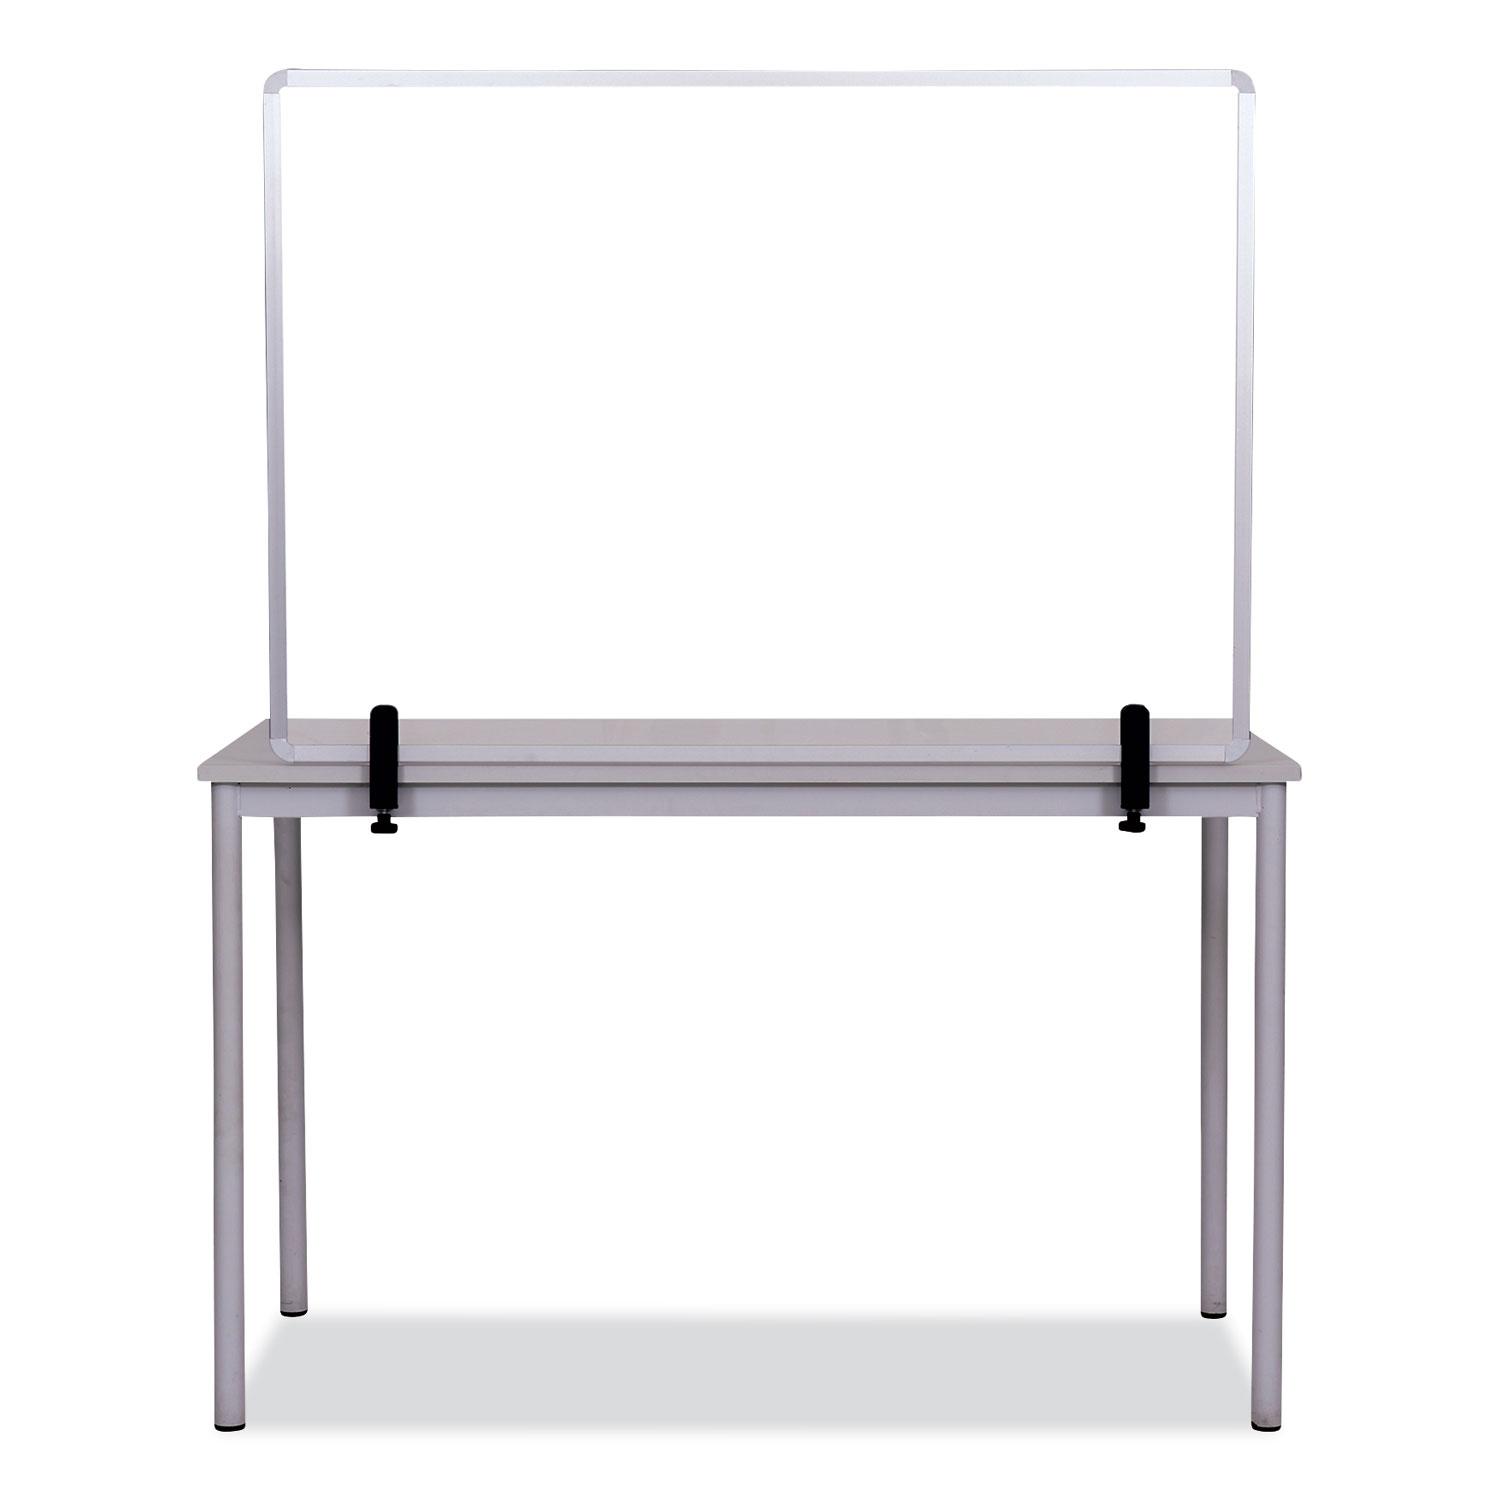 MasterVision® Protector Series Glass Aluminum Desktop Divider, 47.2 x 0.16 x 35.4, Clear